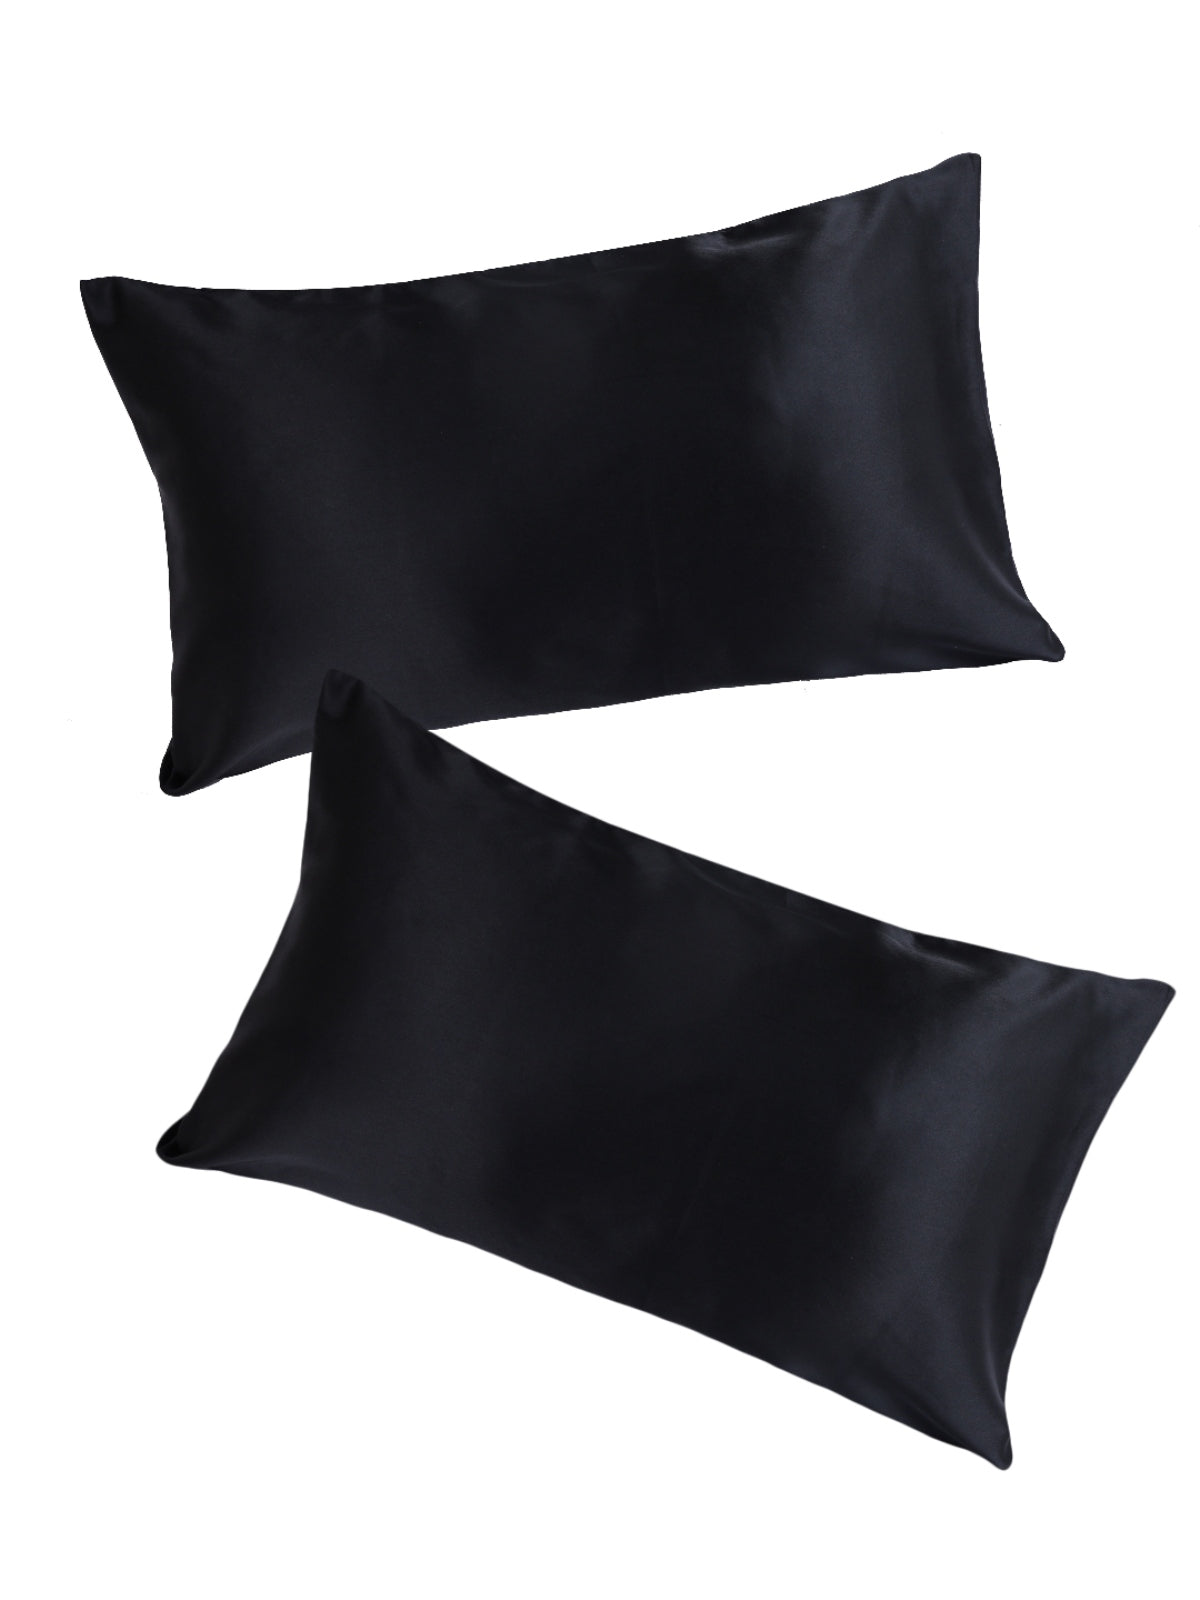 Black Set of 2 Solid Patterned Pillow Covers